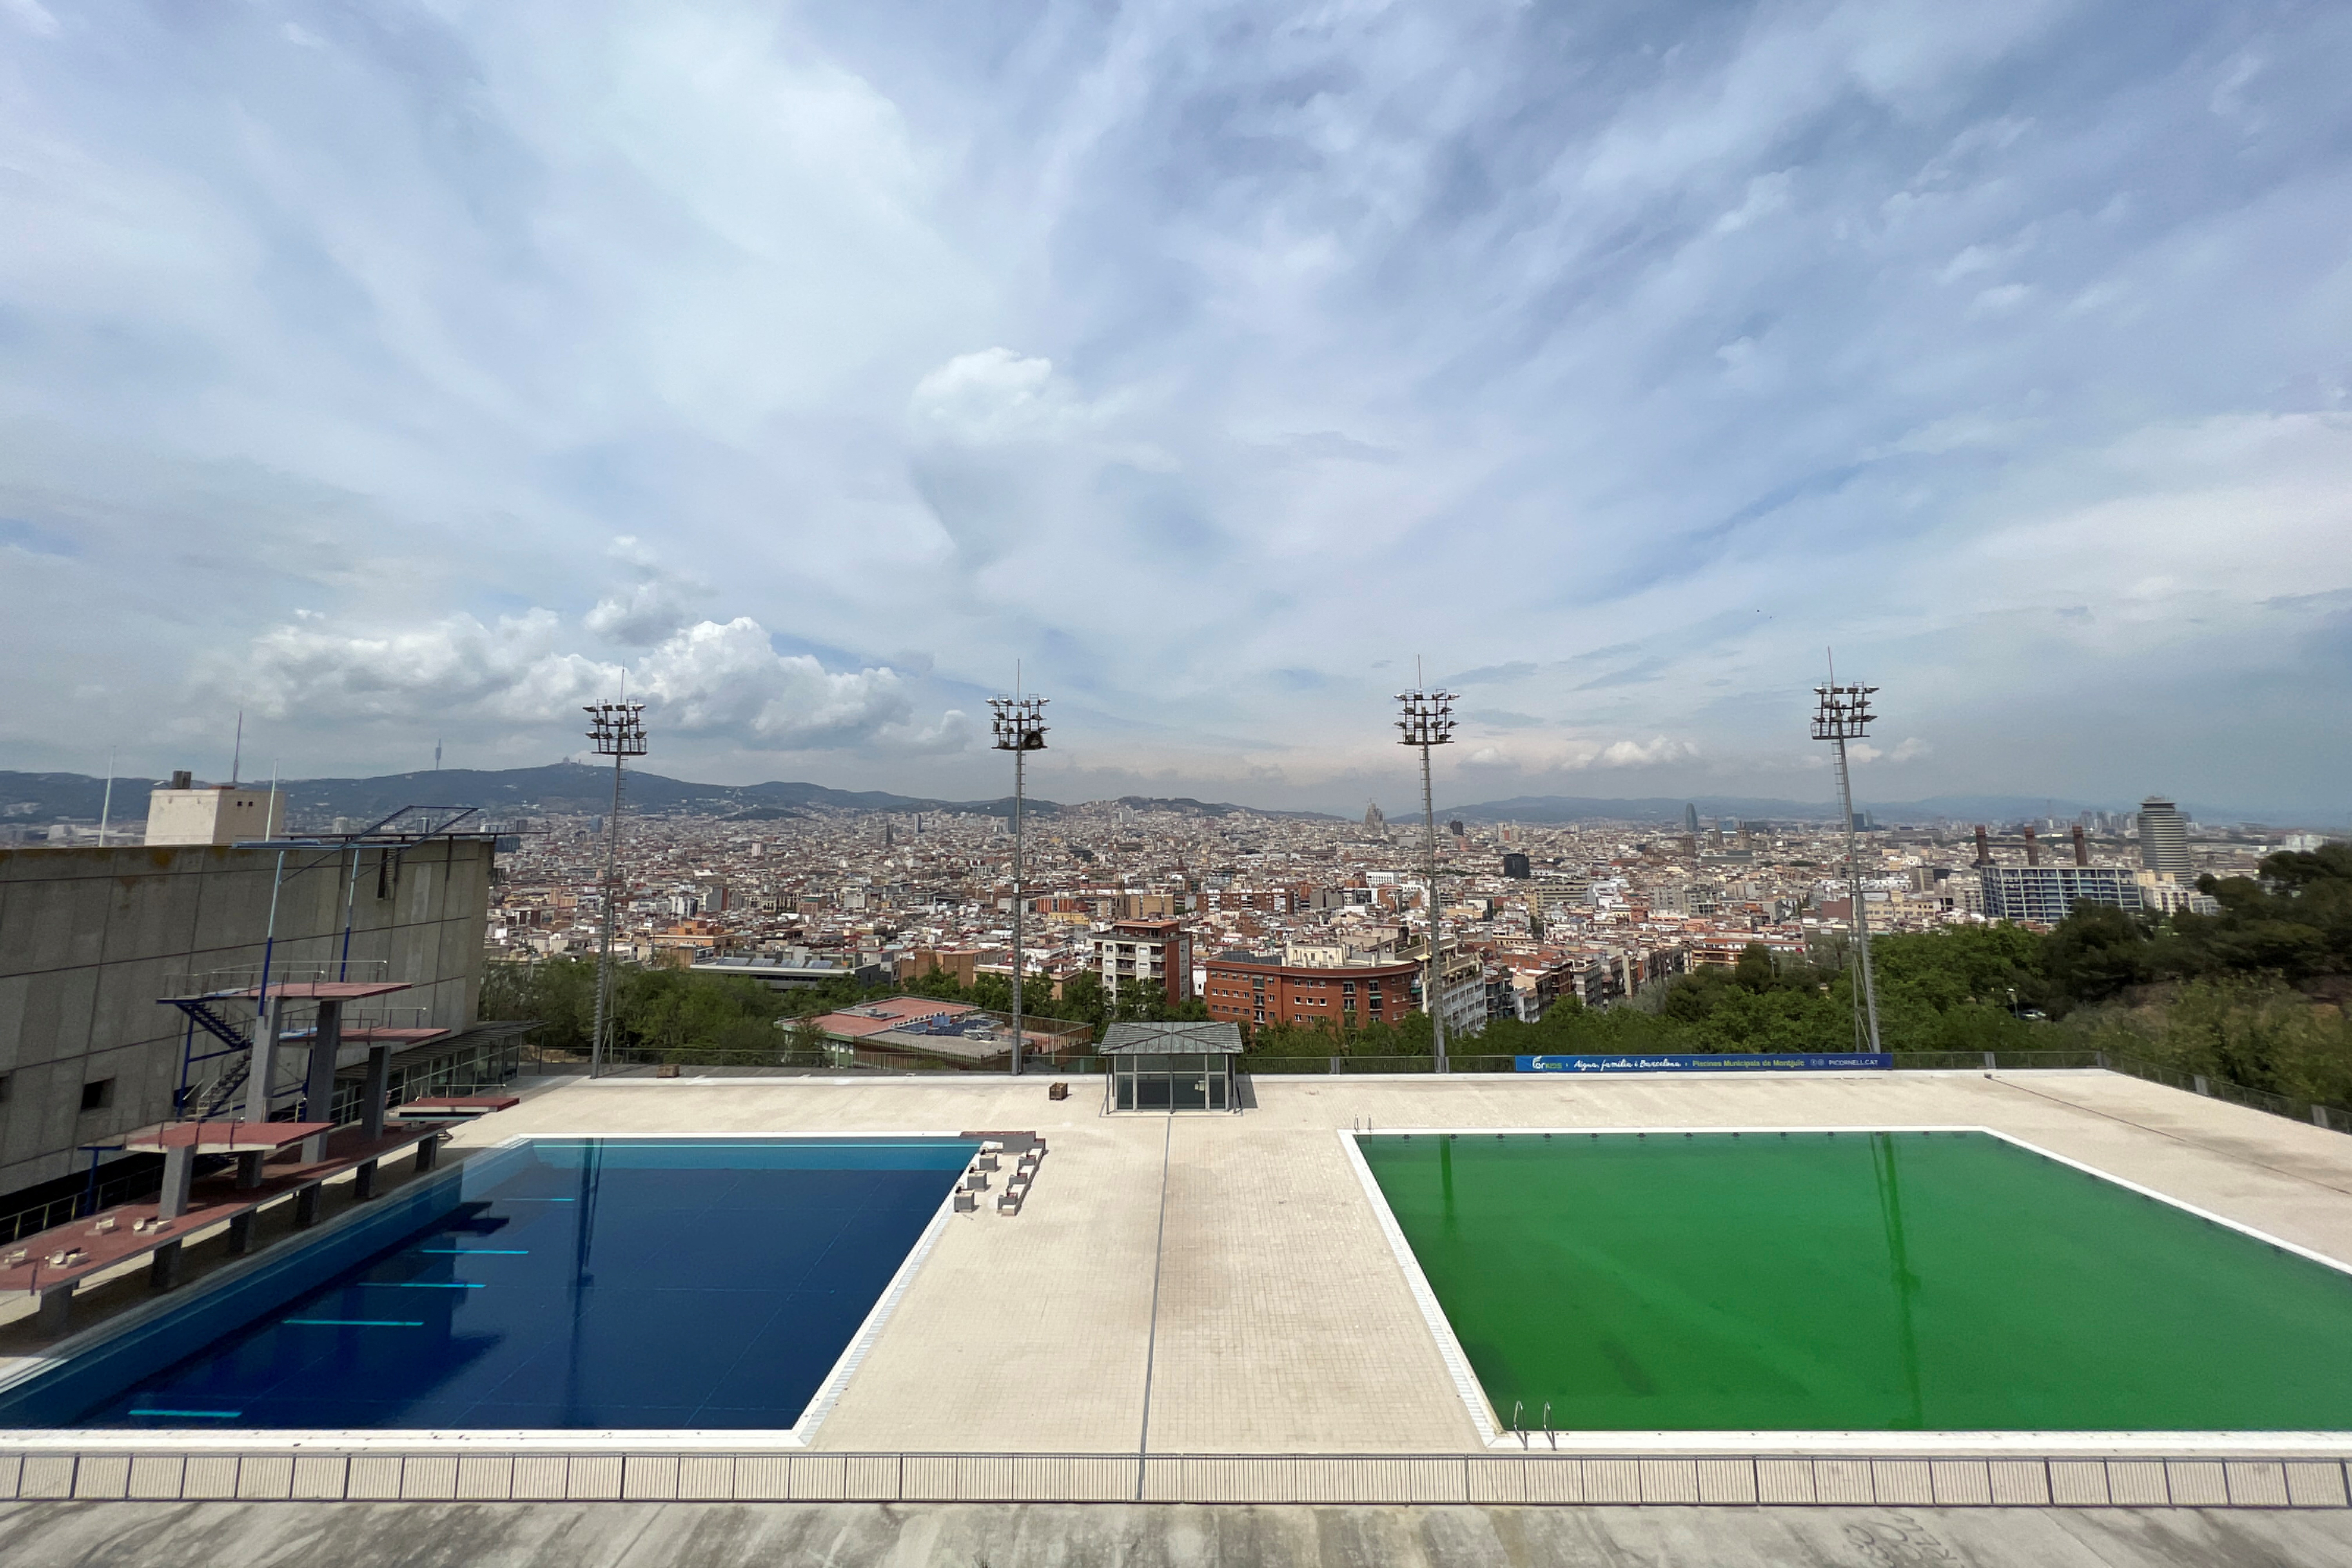 Spain’s swimming pools feel the heat as water supplies dwindle